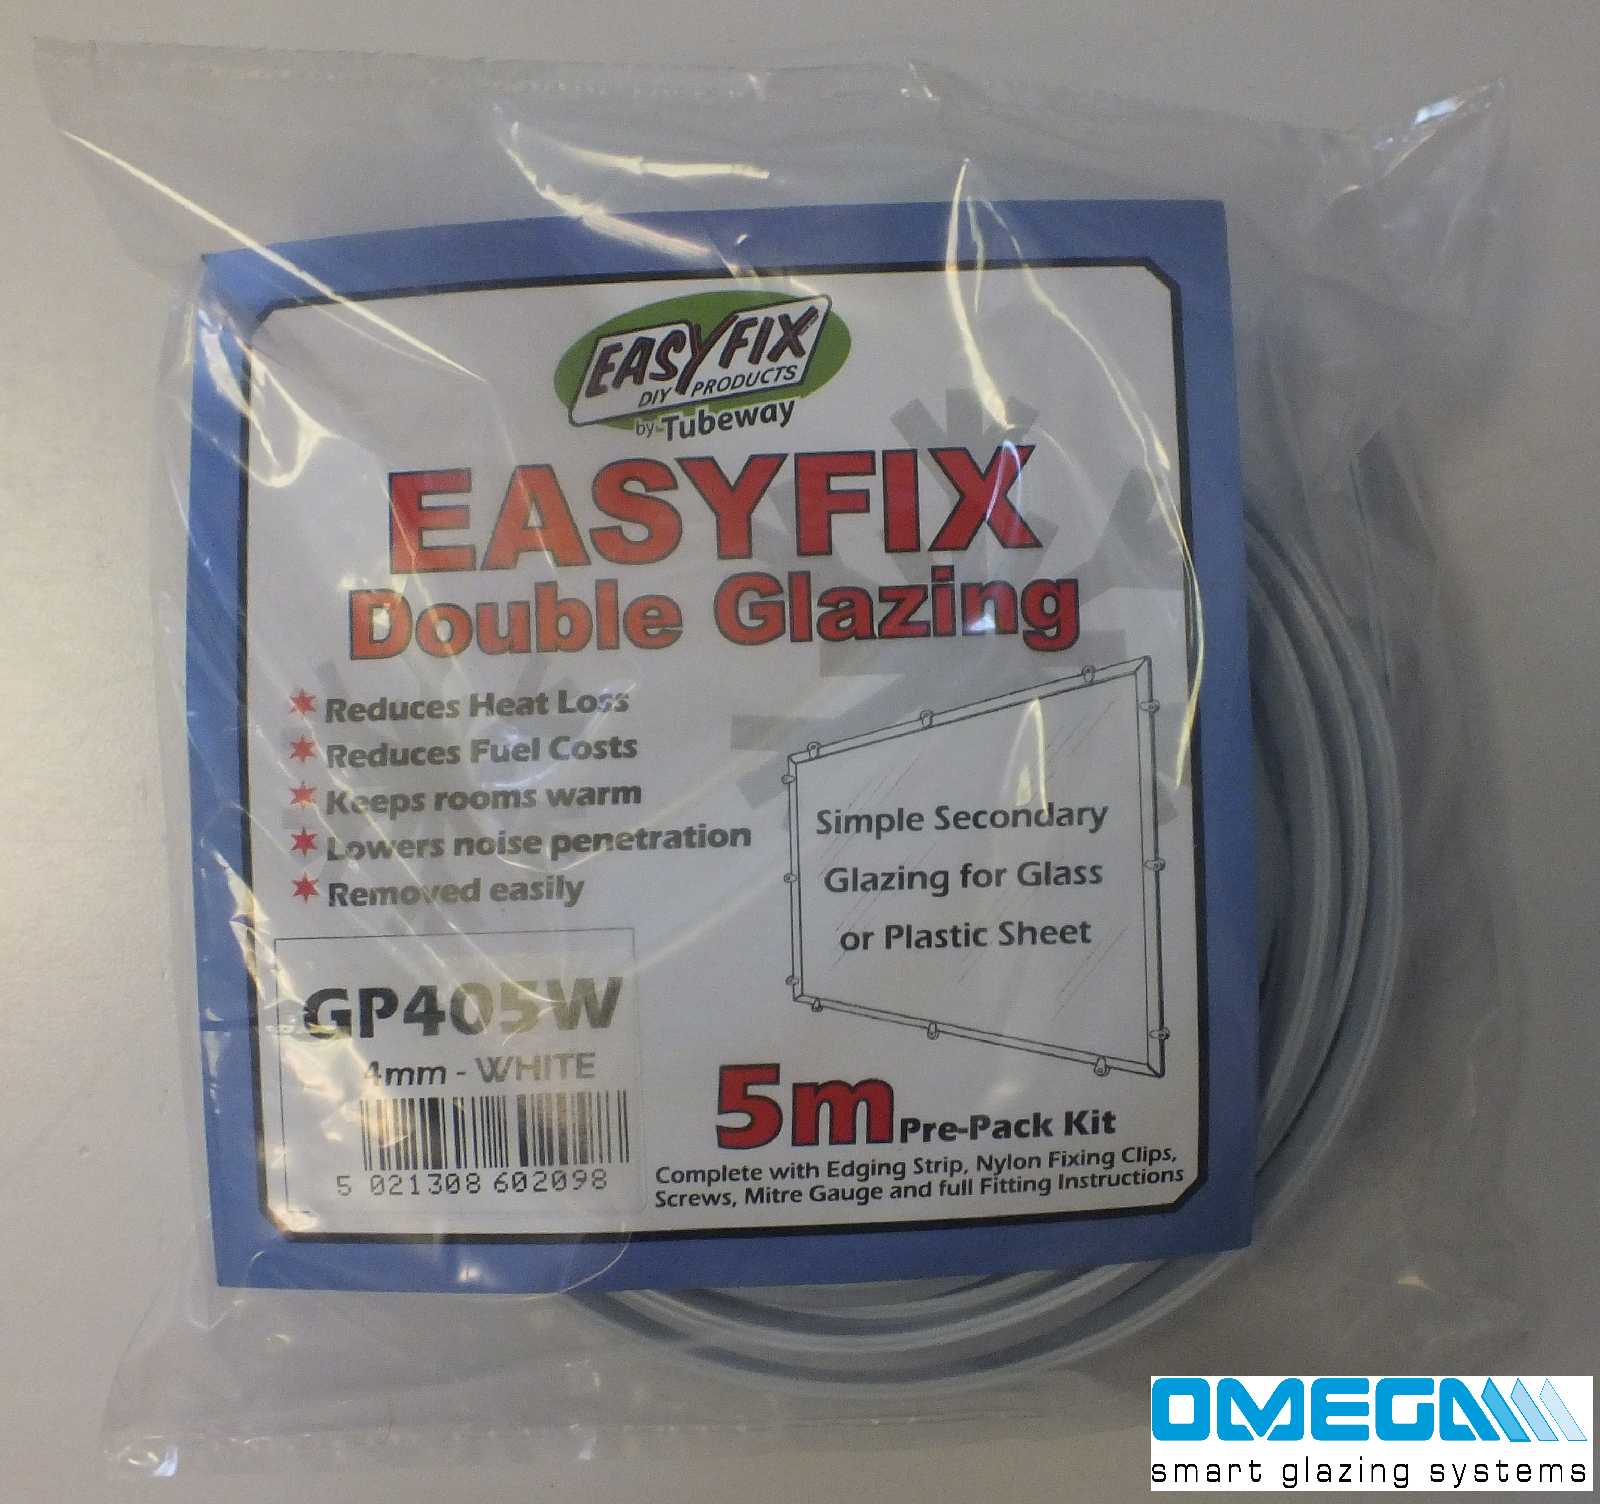 Easyfix Clipglaze Edging Kit - 5m roll of edging for 3mm Glazing Thickness, Clear